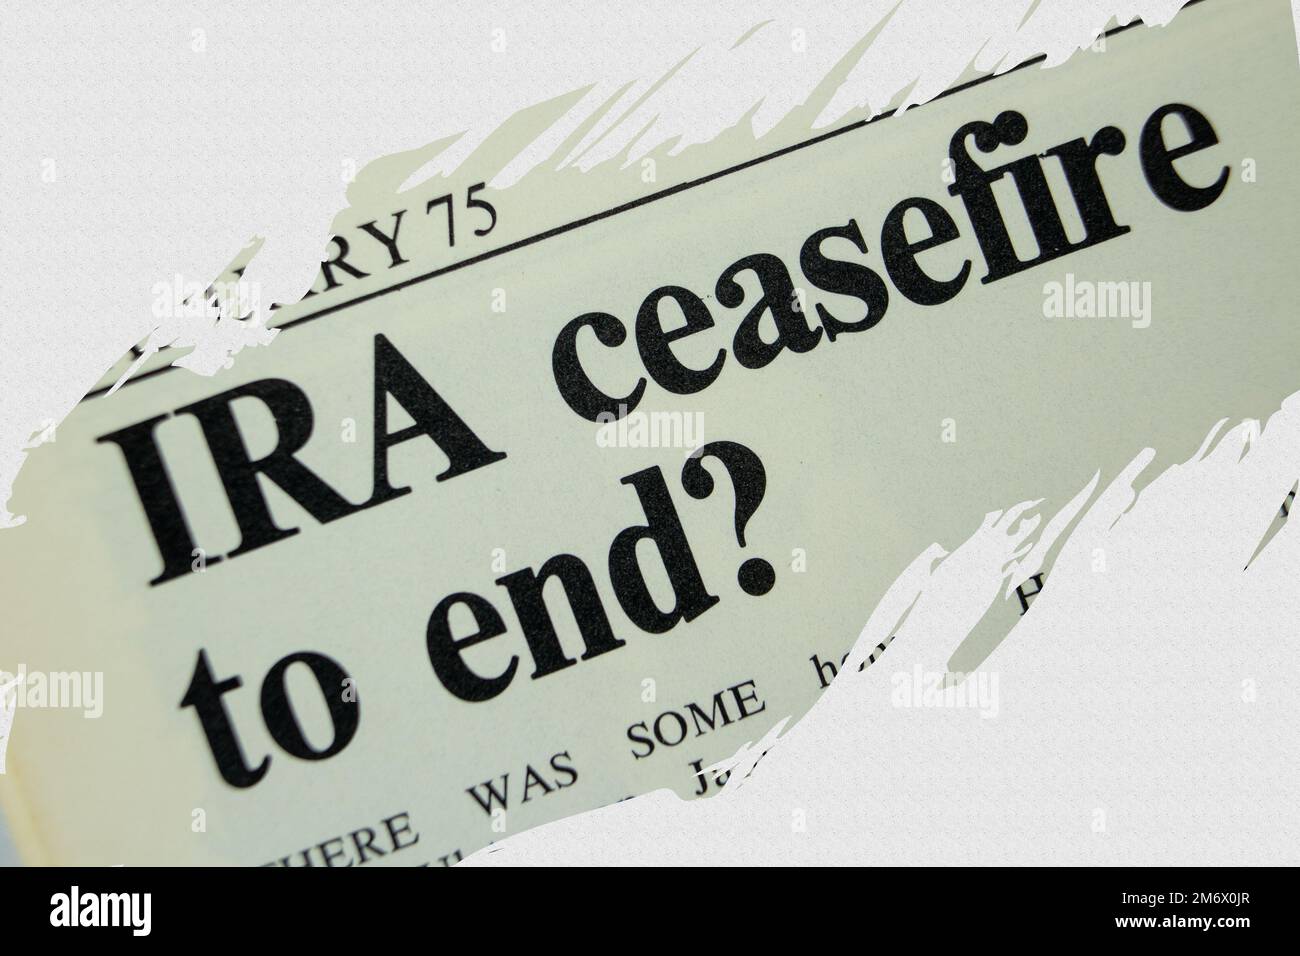 news story from 1975 newspaper headline article title - IRA ceasefire to end Stock Photo